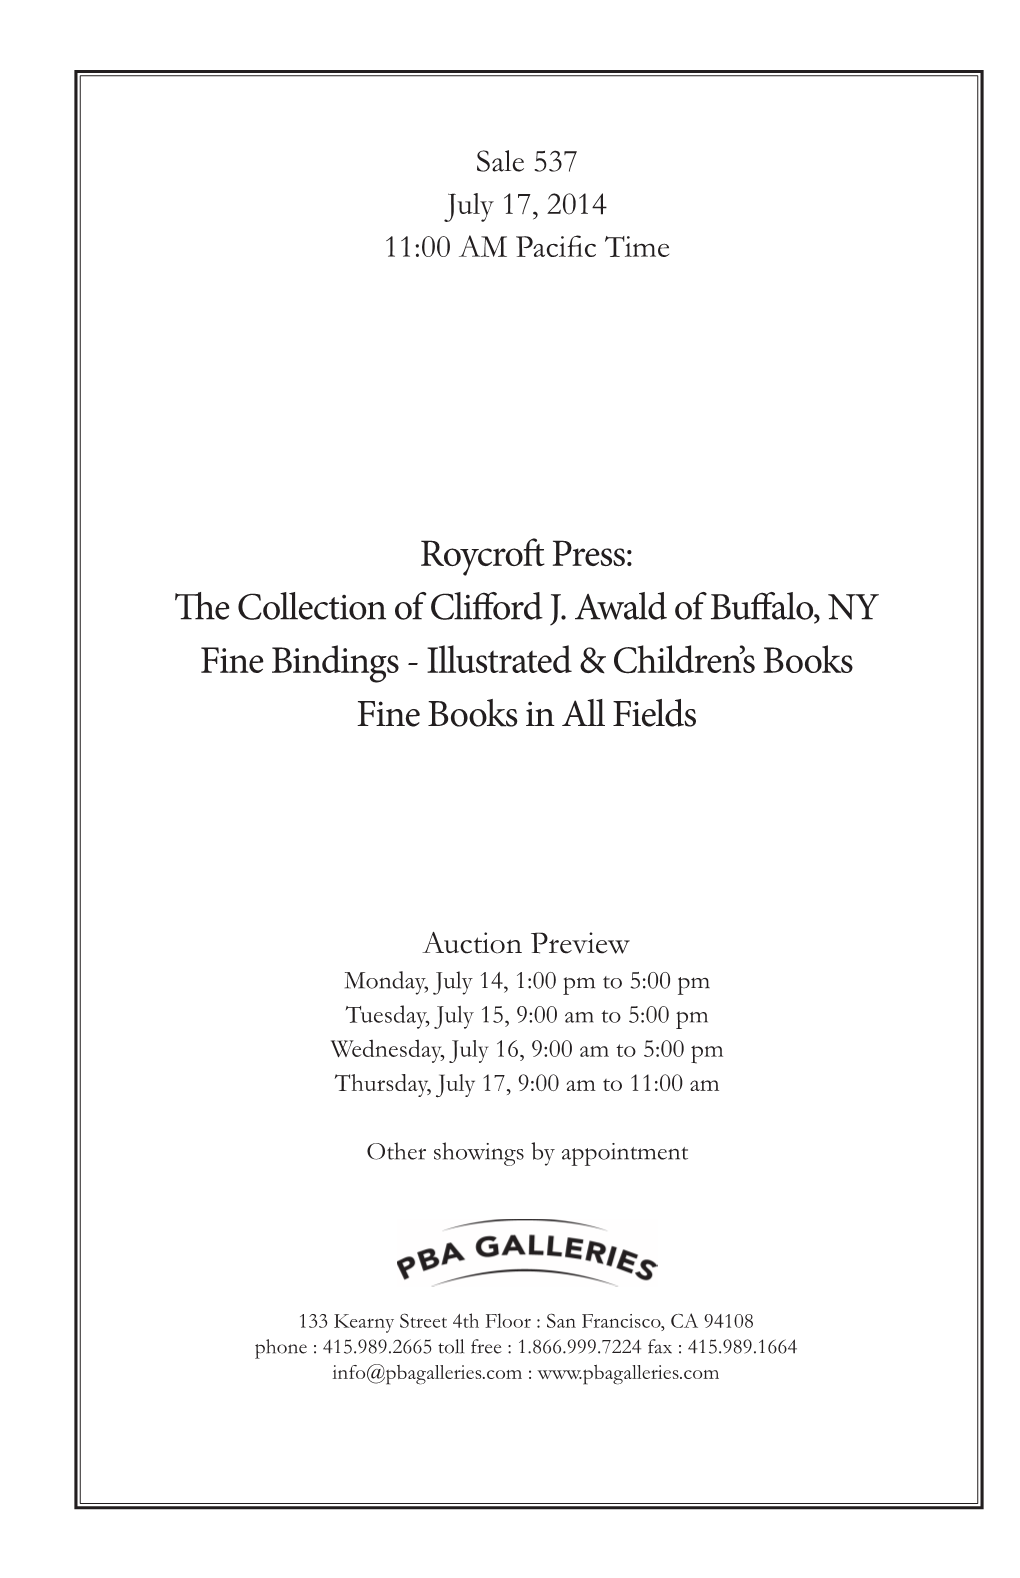 Roycroft Press: the Collection of Clifford J